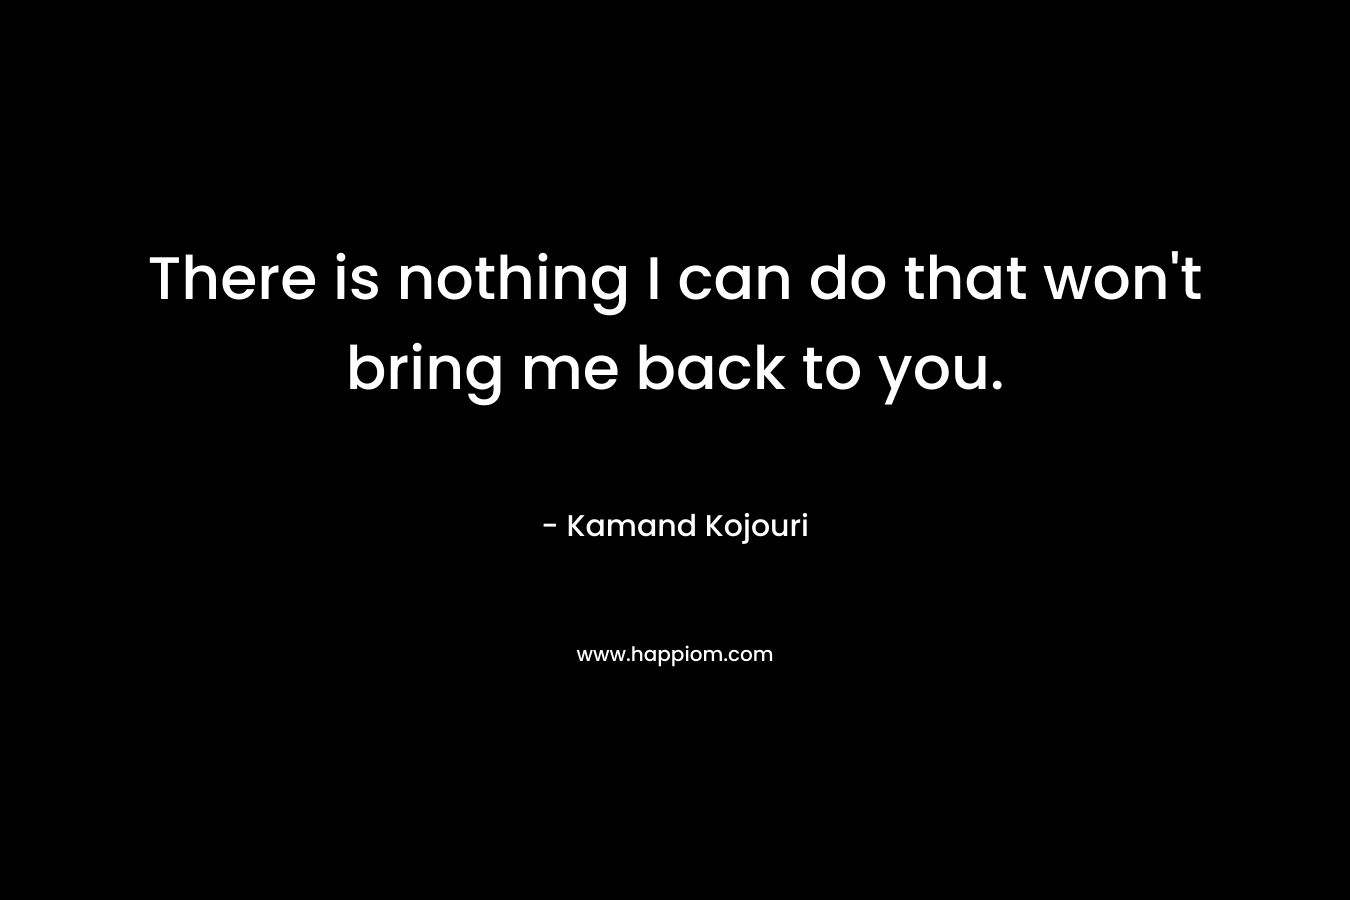 There is nothing I can do that won’t bring me back to you. – Kamand Kojouri